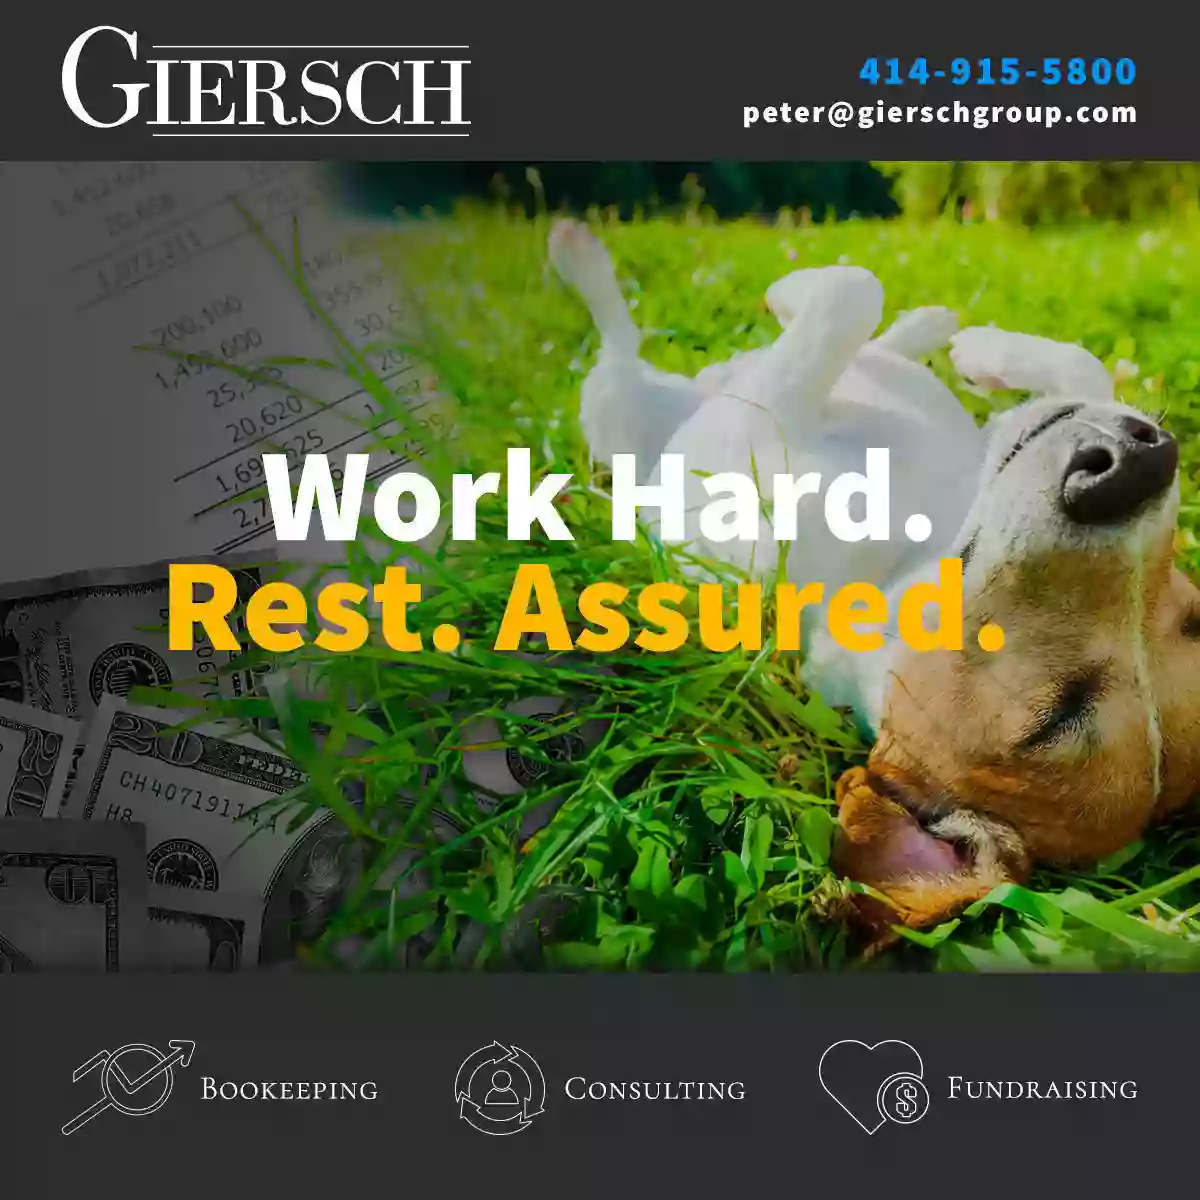 The Giersch Group Bookkeeping & Consulting Services